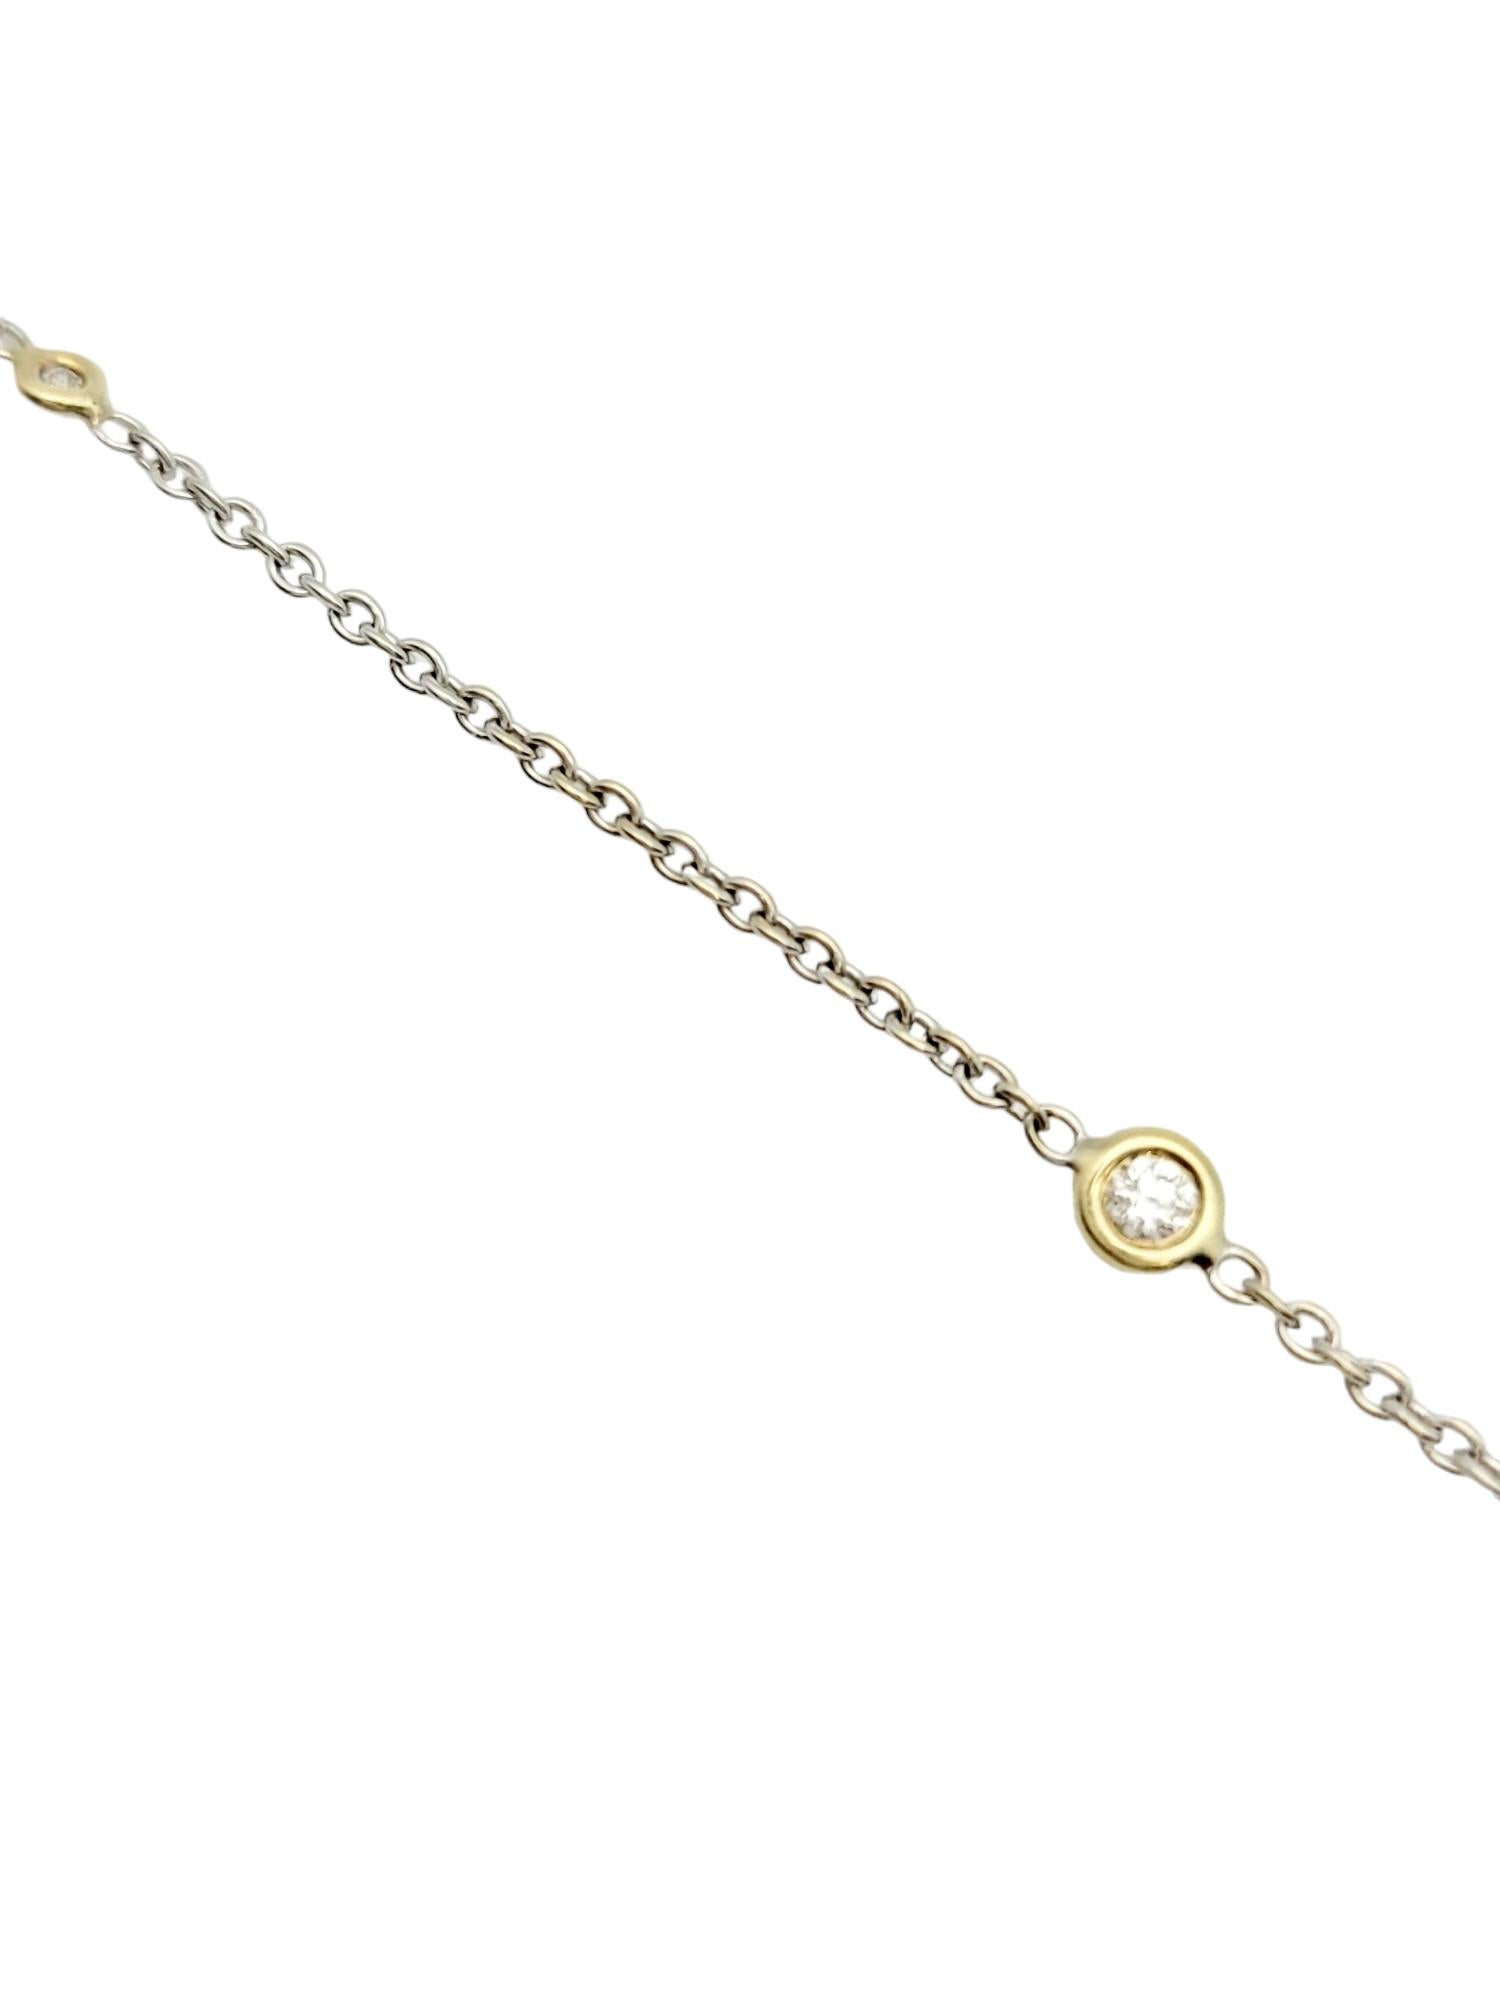 Contemporary Roberto Coin Diamonds by the Inch Station Bracelet in Two-Tone 18 Karat Gold For Sale